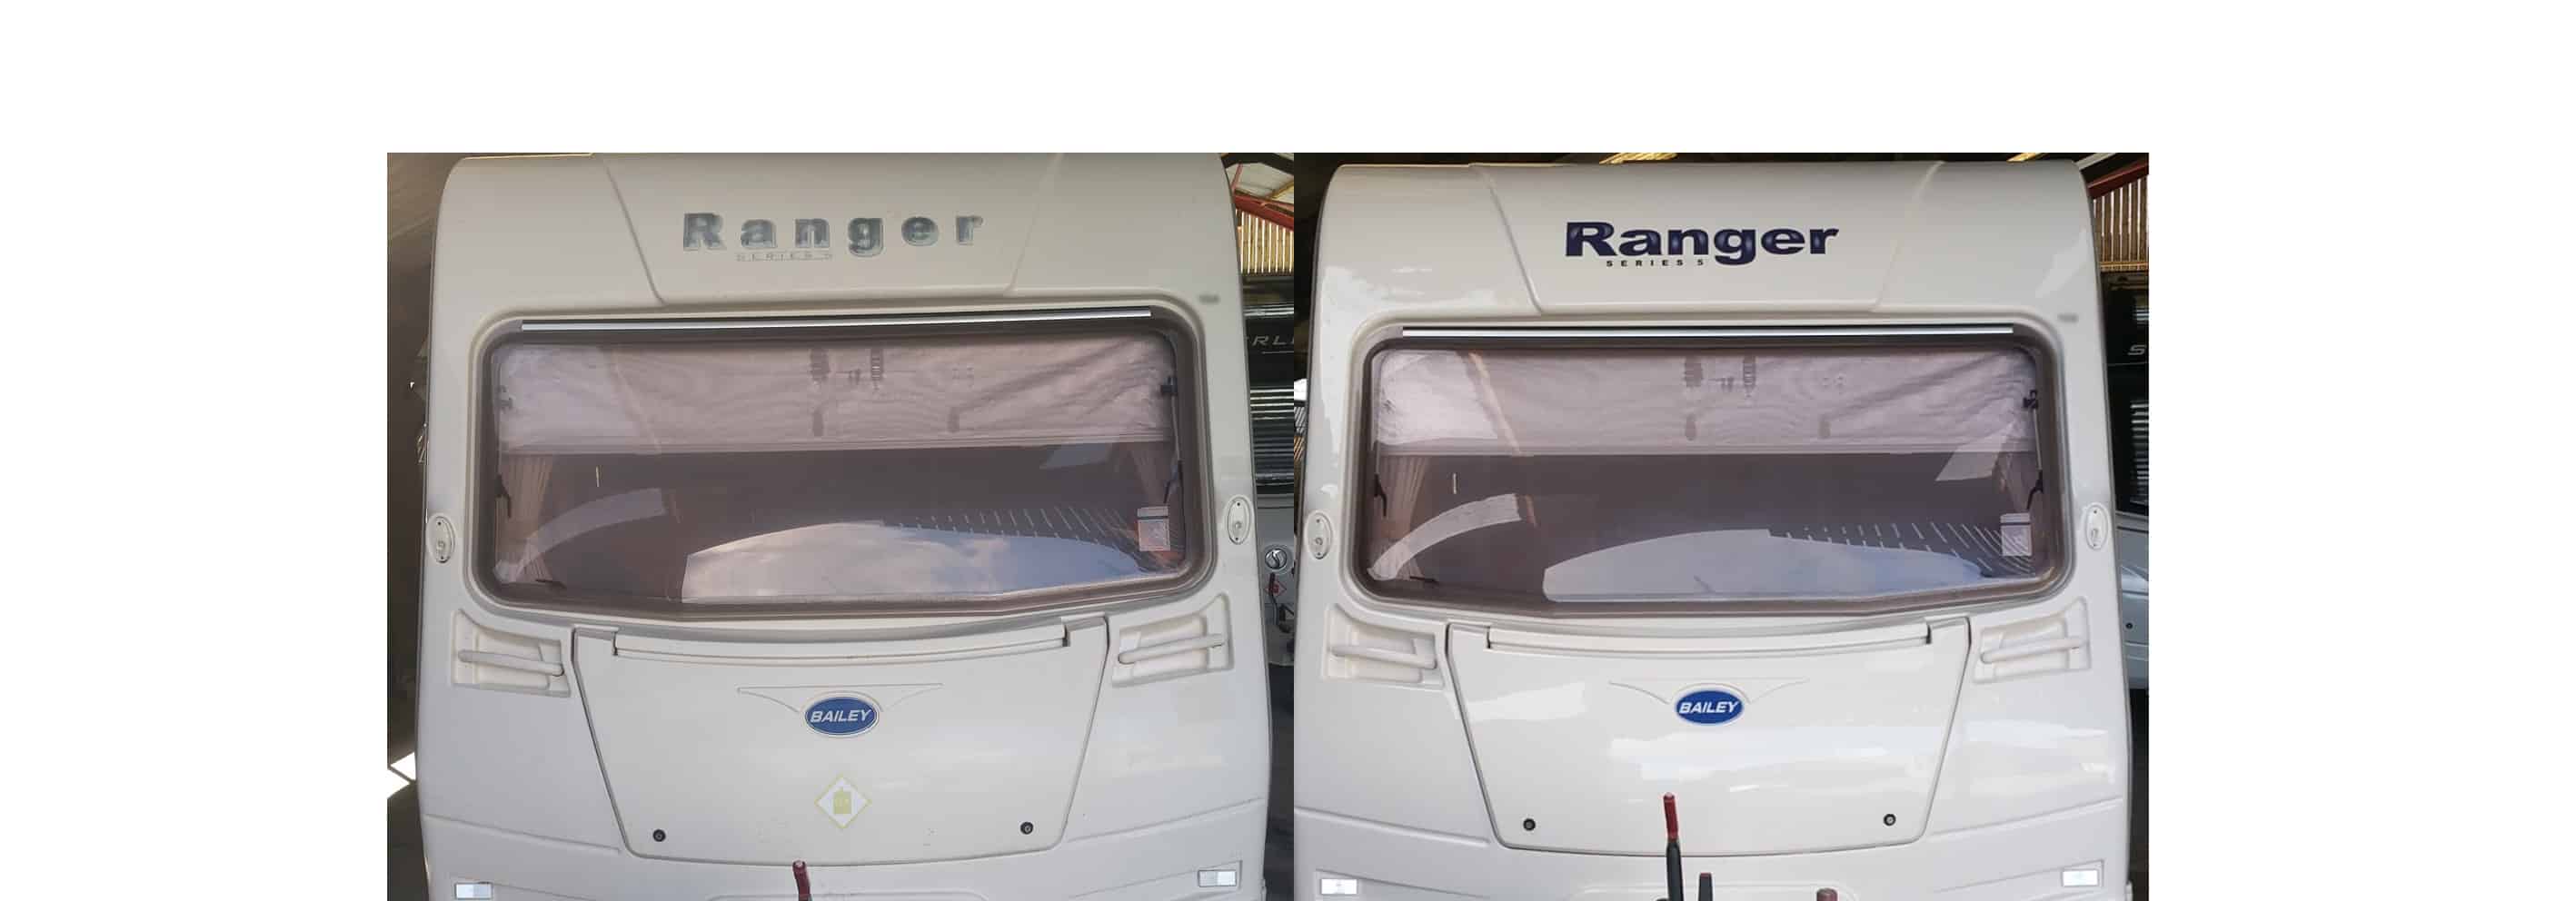 Bailey Ranger Front Sticker Replacement and Polish